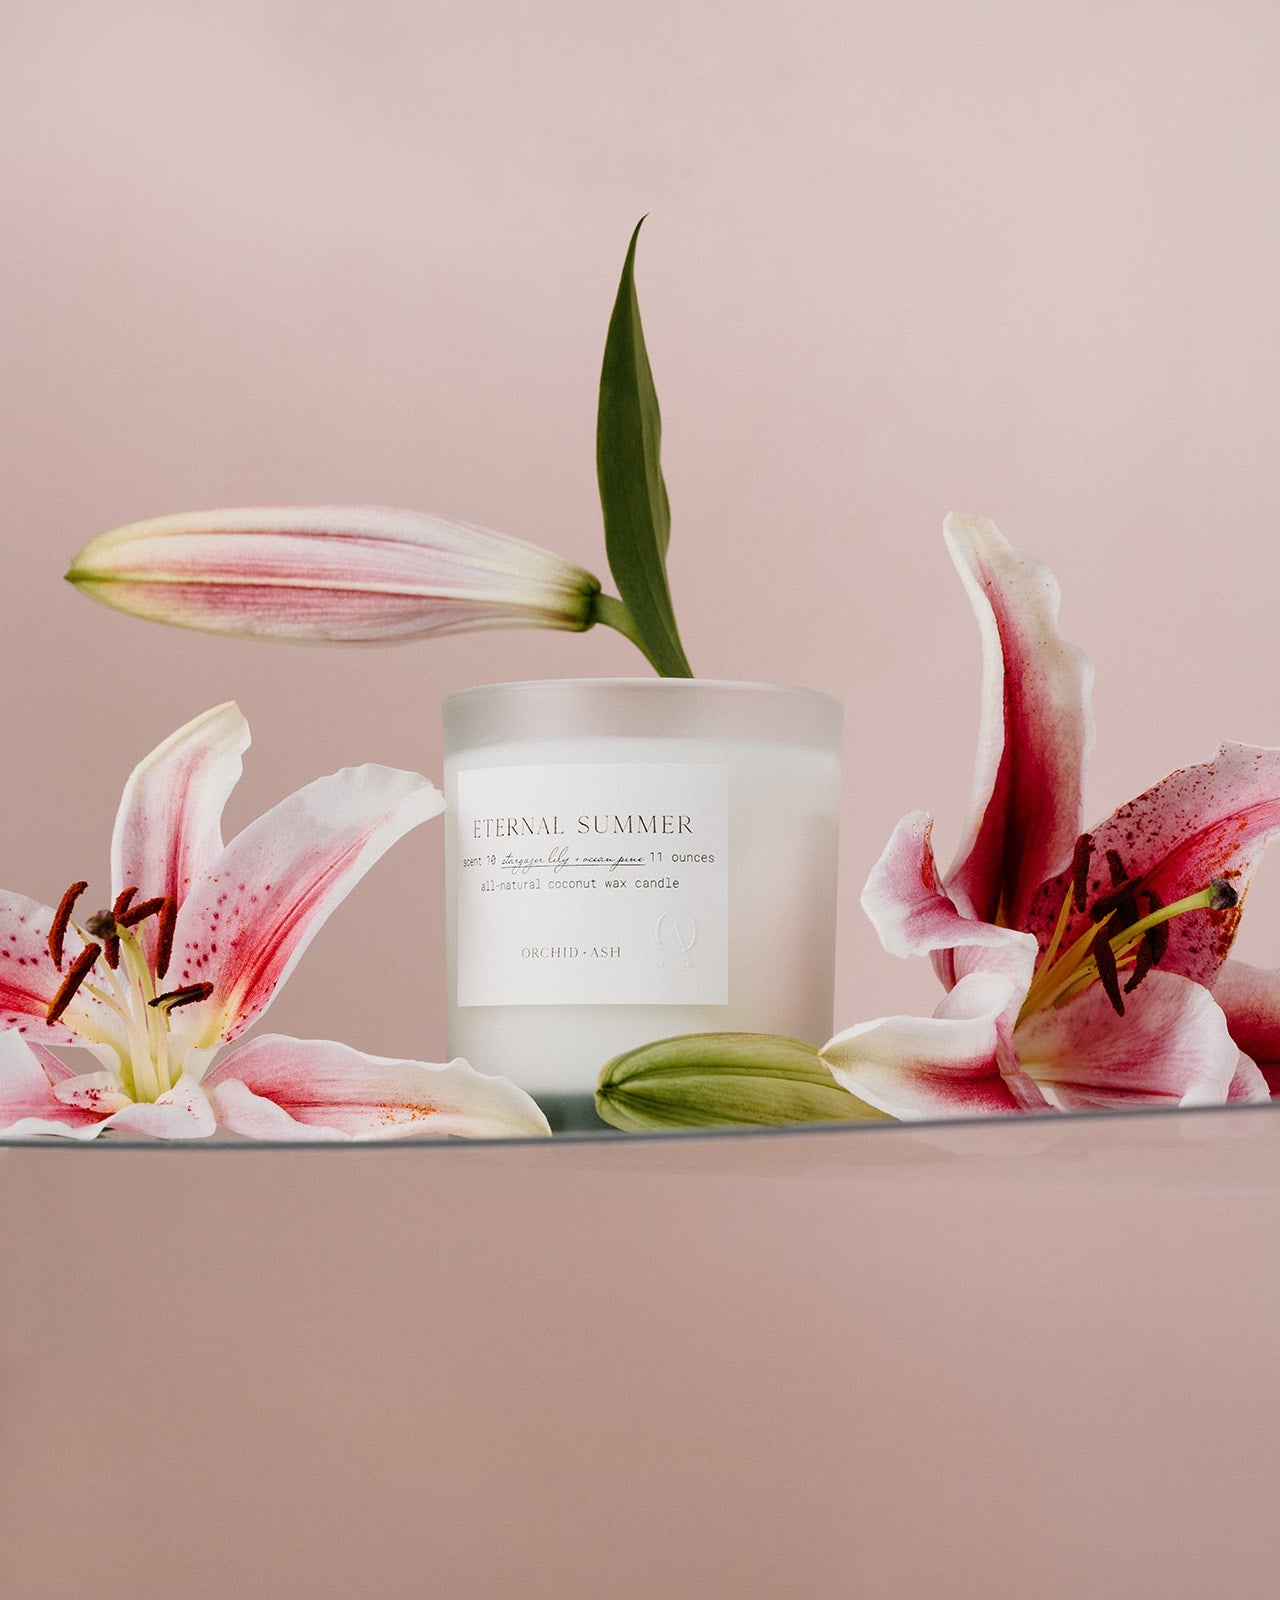 ETERNAL SUMMER Natural Candle by Orchid + Ash